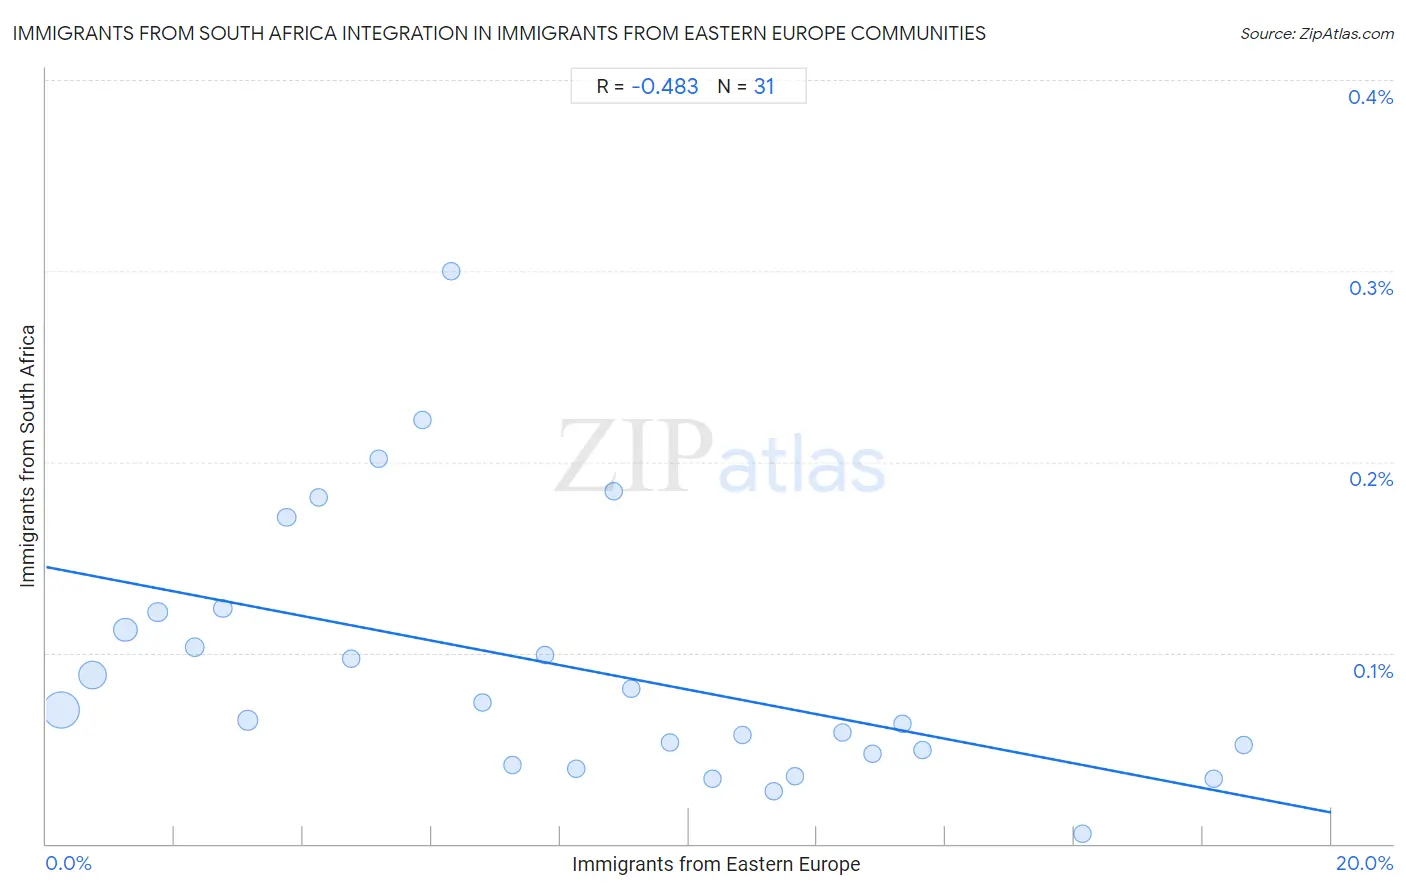 Immigrants from Eastern Europe Integration in Immigrants from South Africa Communities